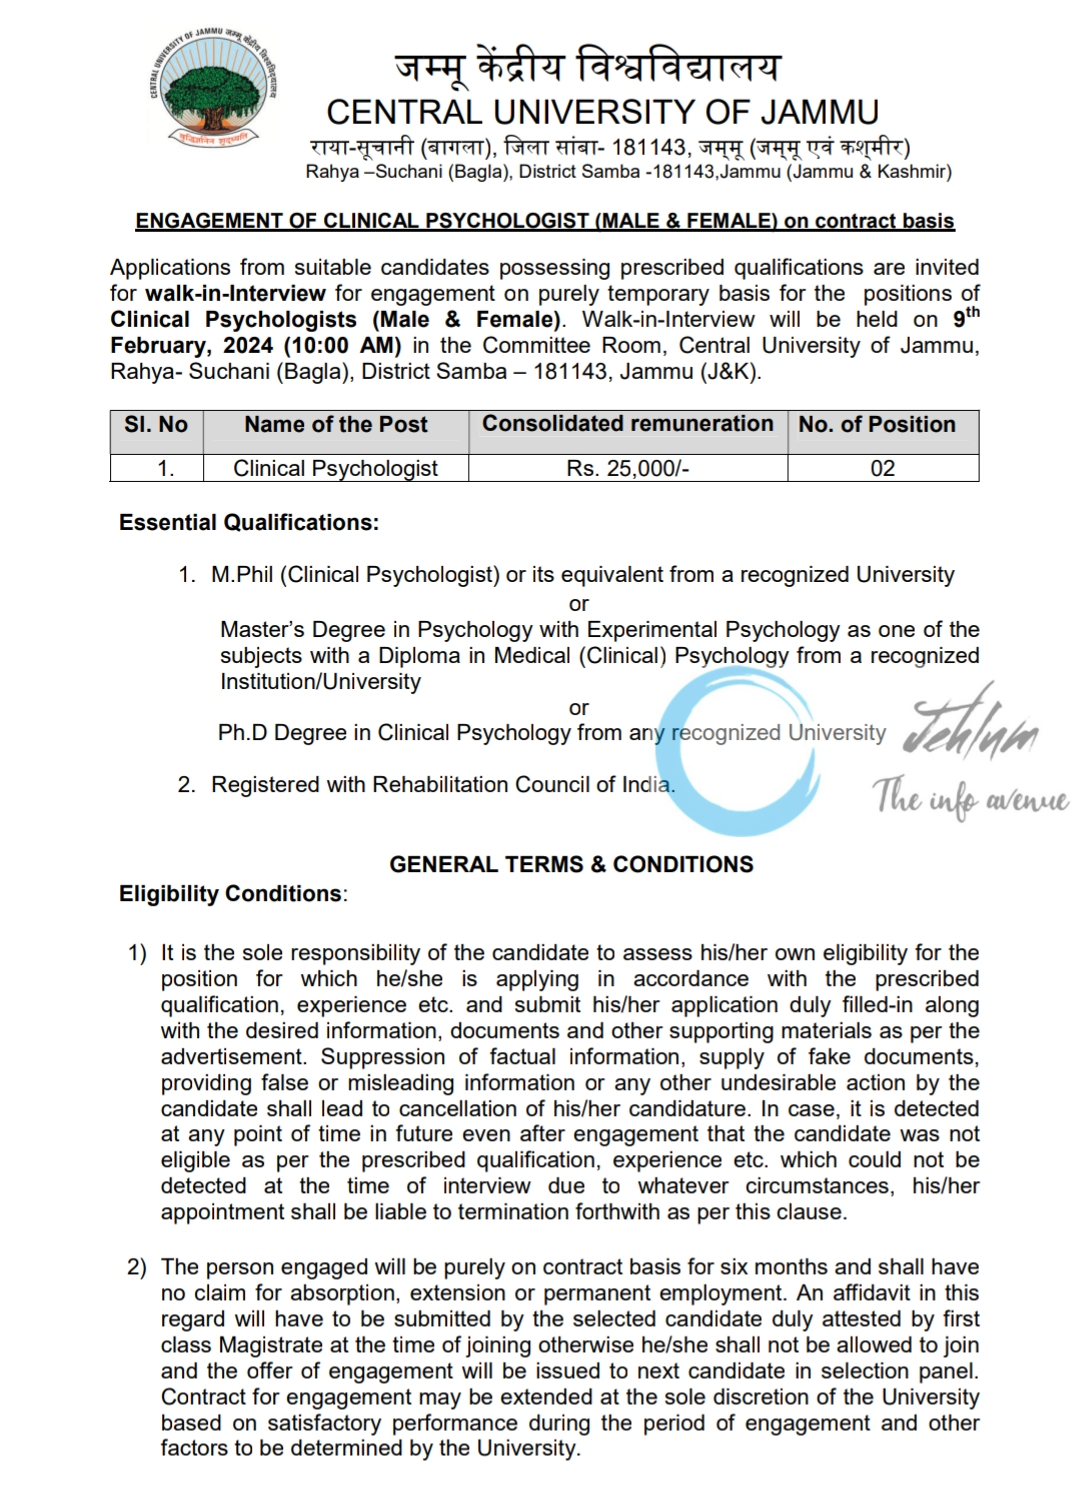 Central University Of Jammu Clinical Psychologists Walk-in-Interview 2024